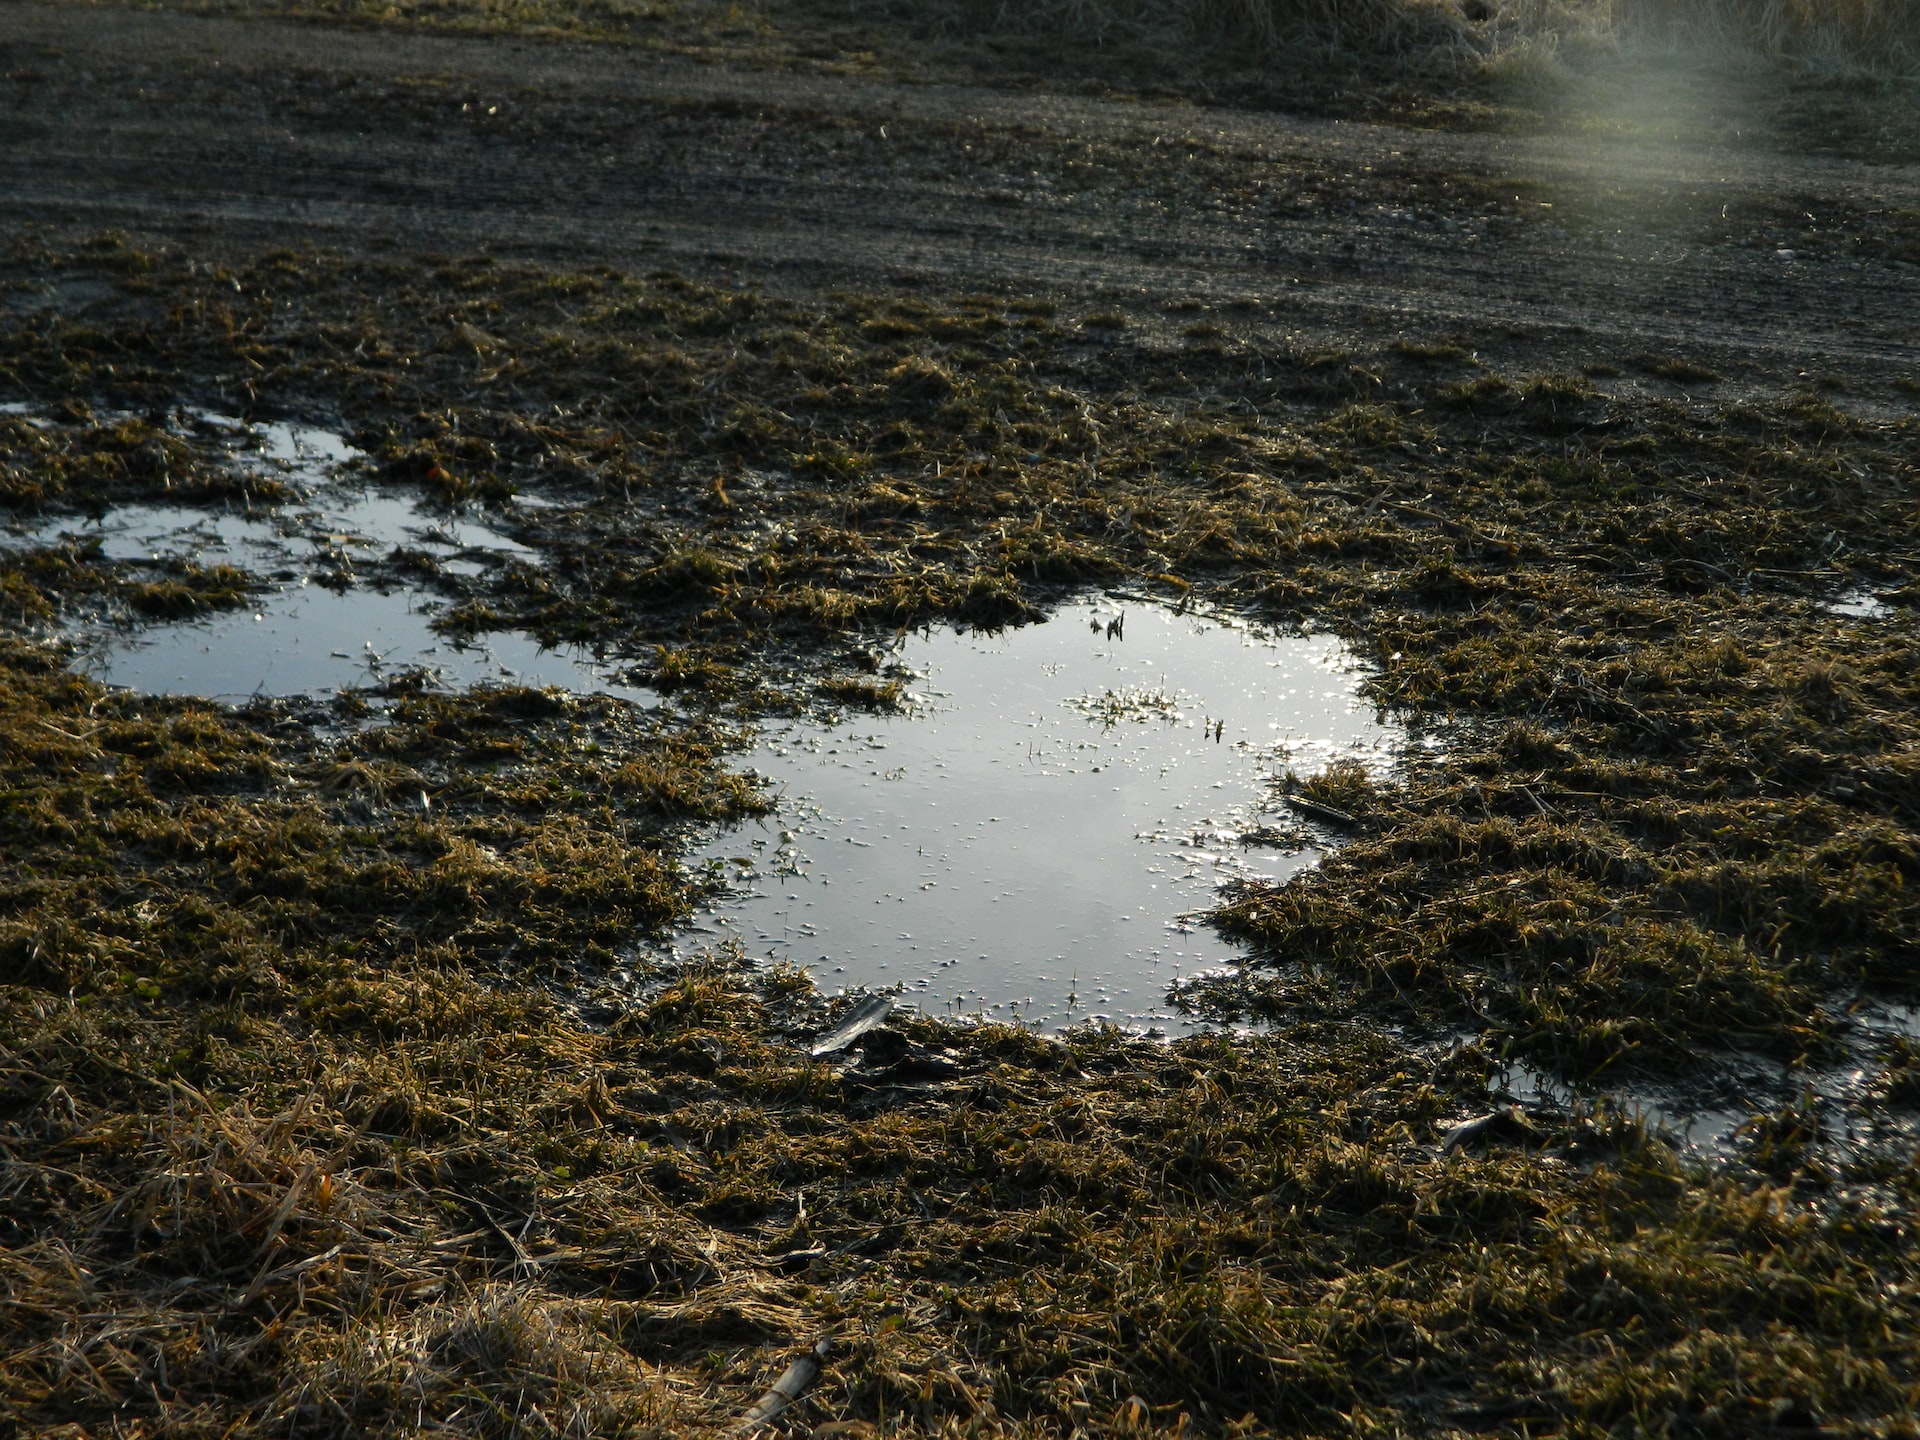 water puddle in grass